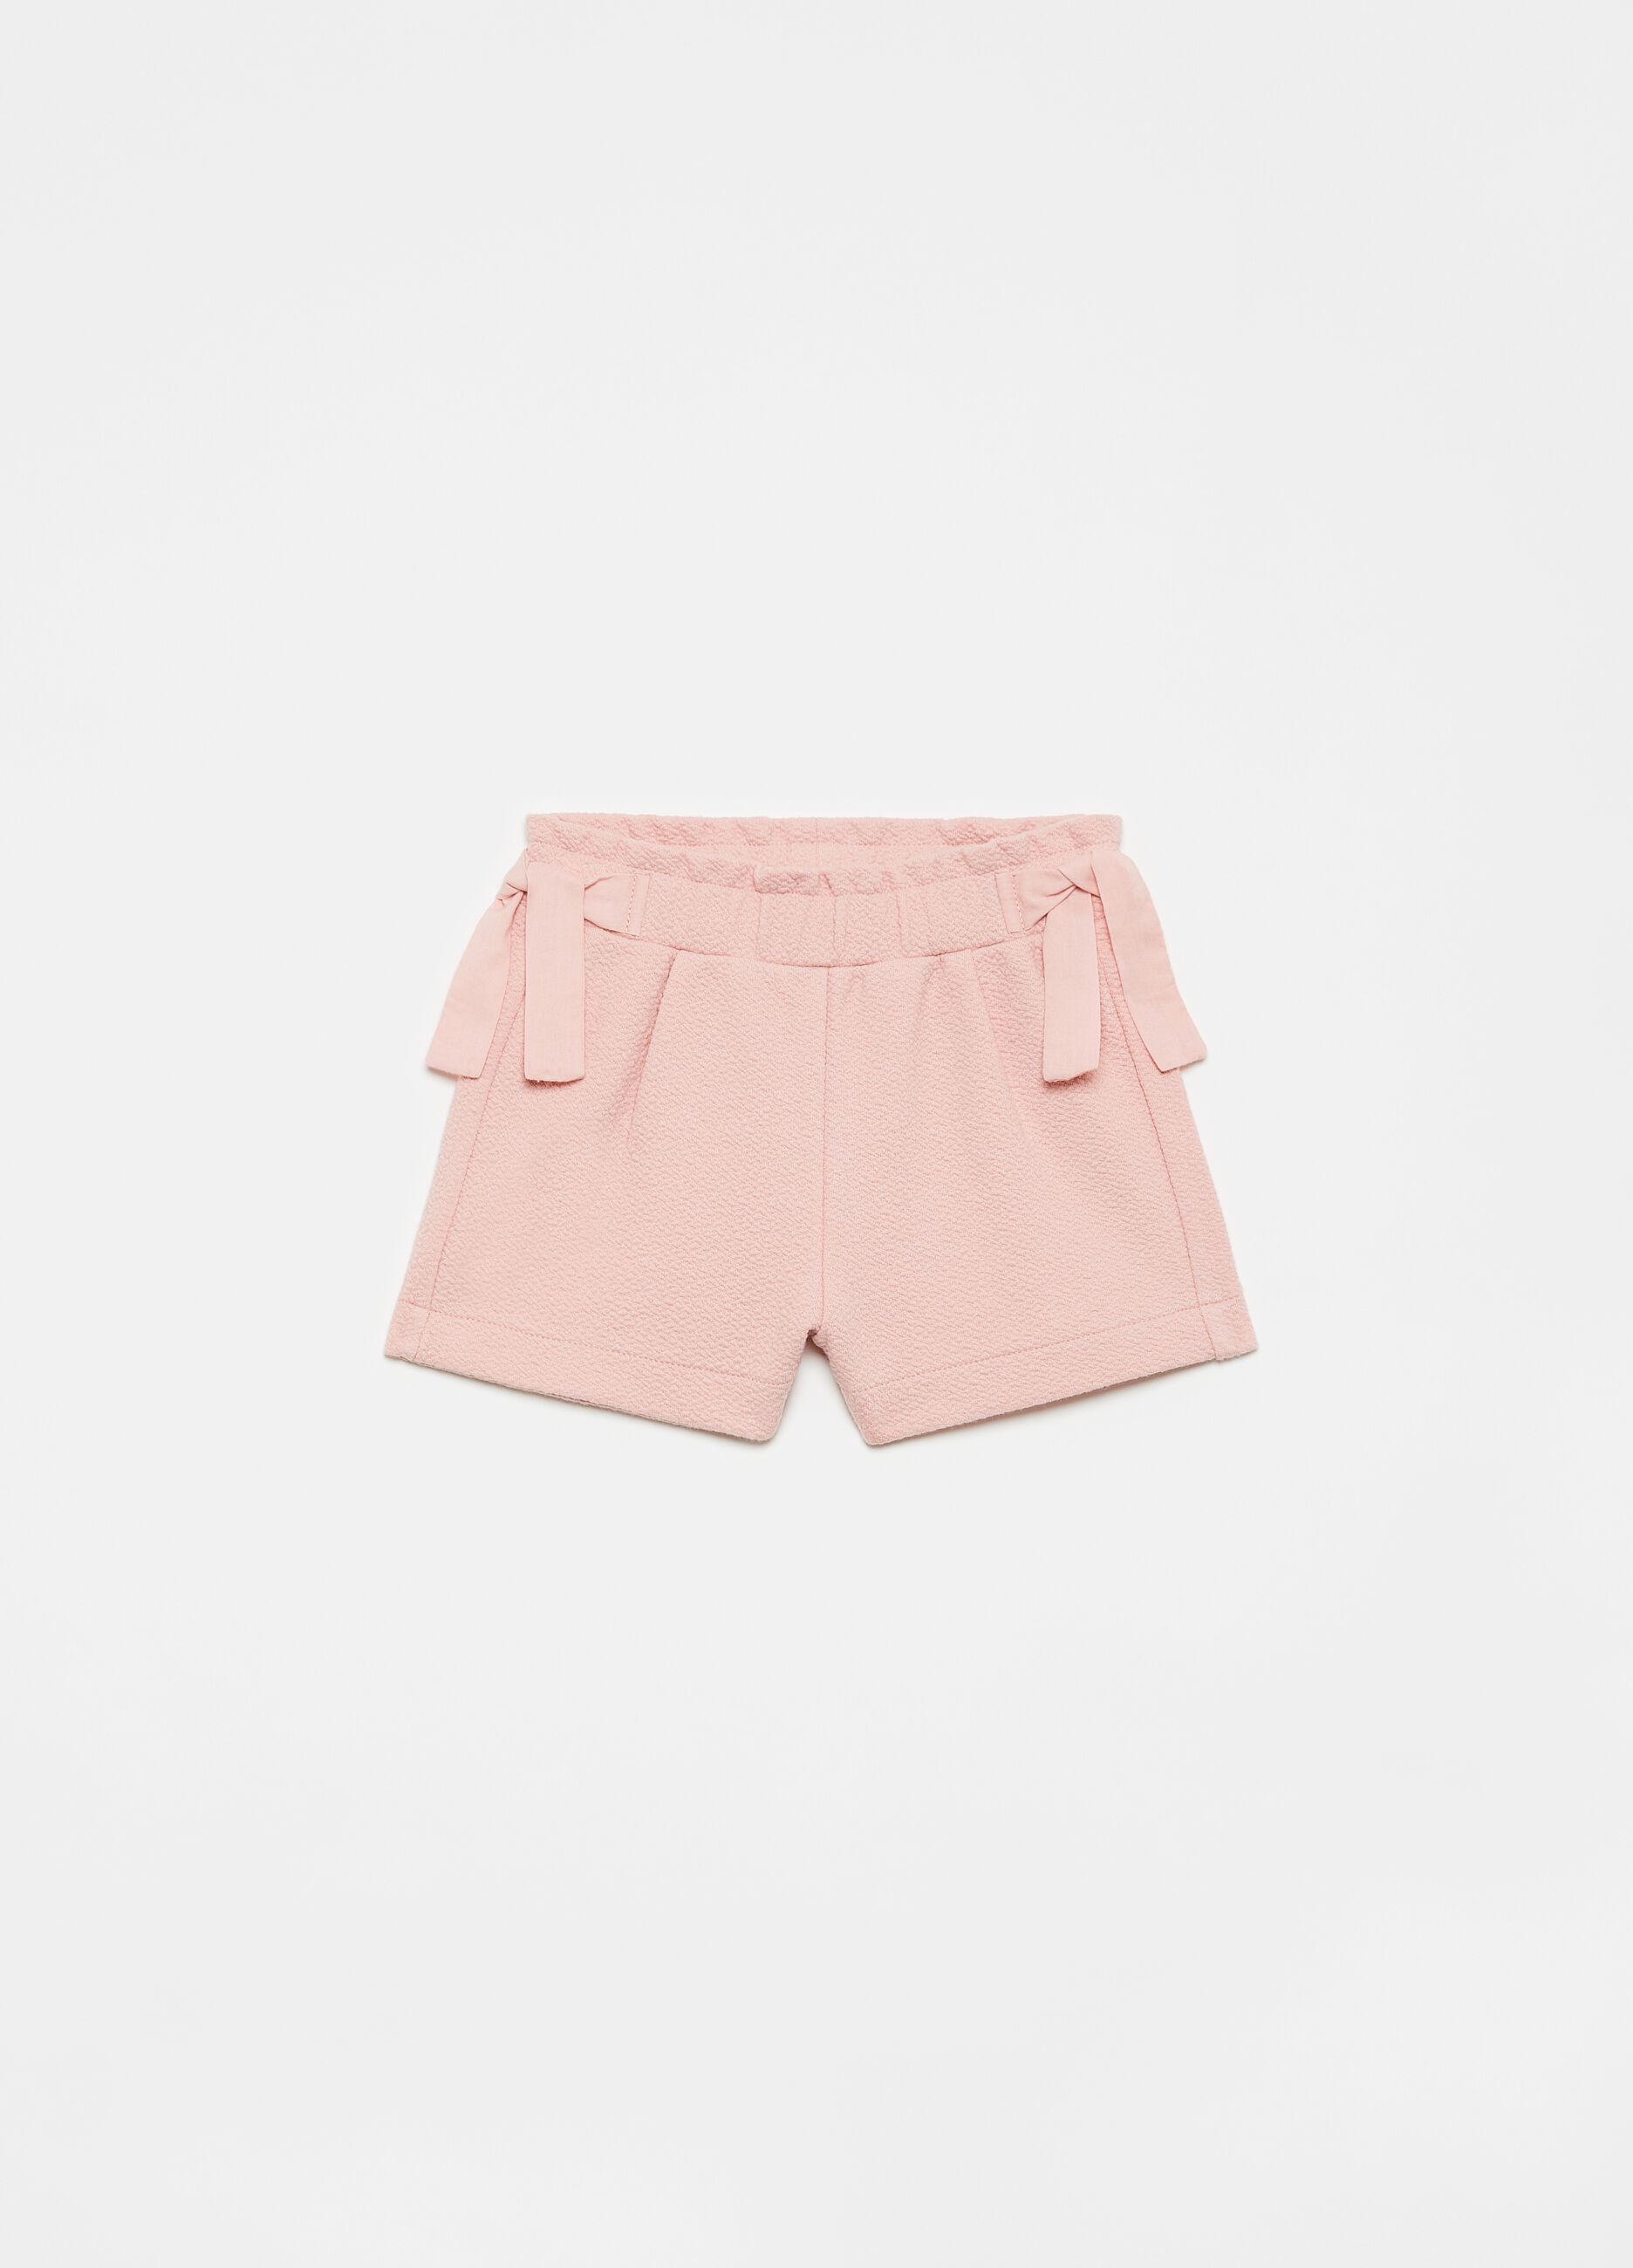 Stretch shorts with bows